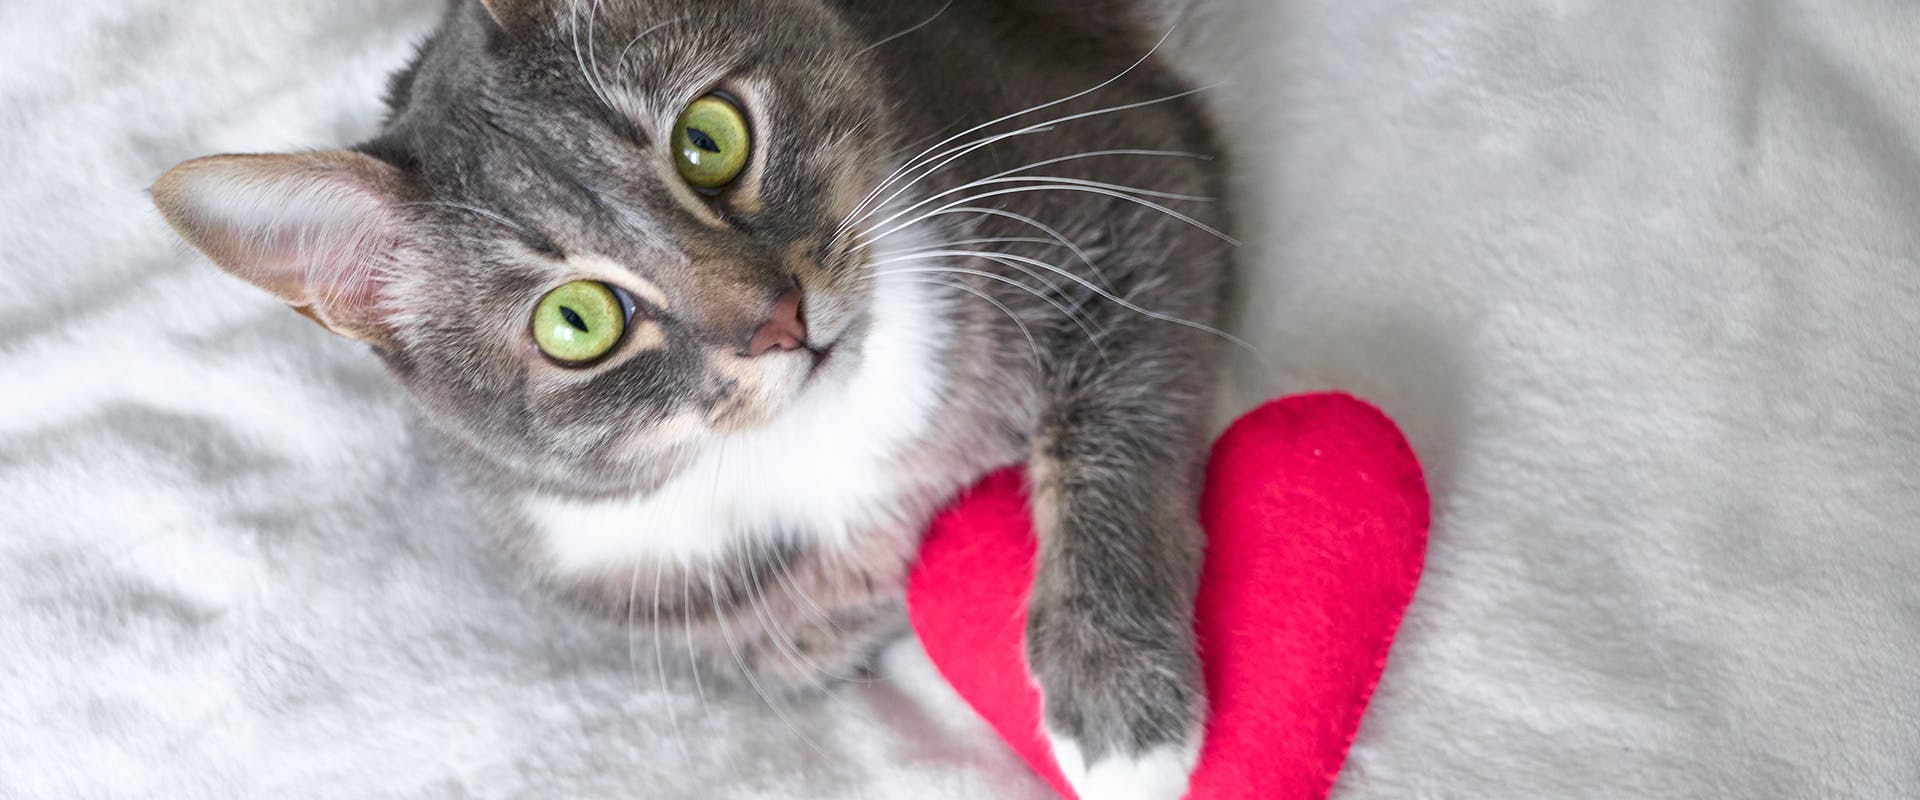 A cat sitting on a blanket, its paw resting on a red heart cushion